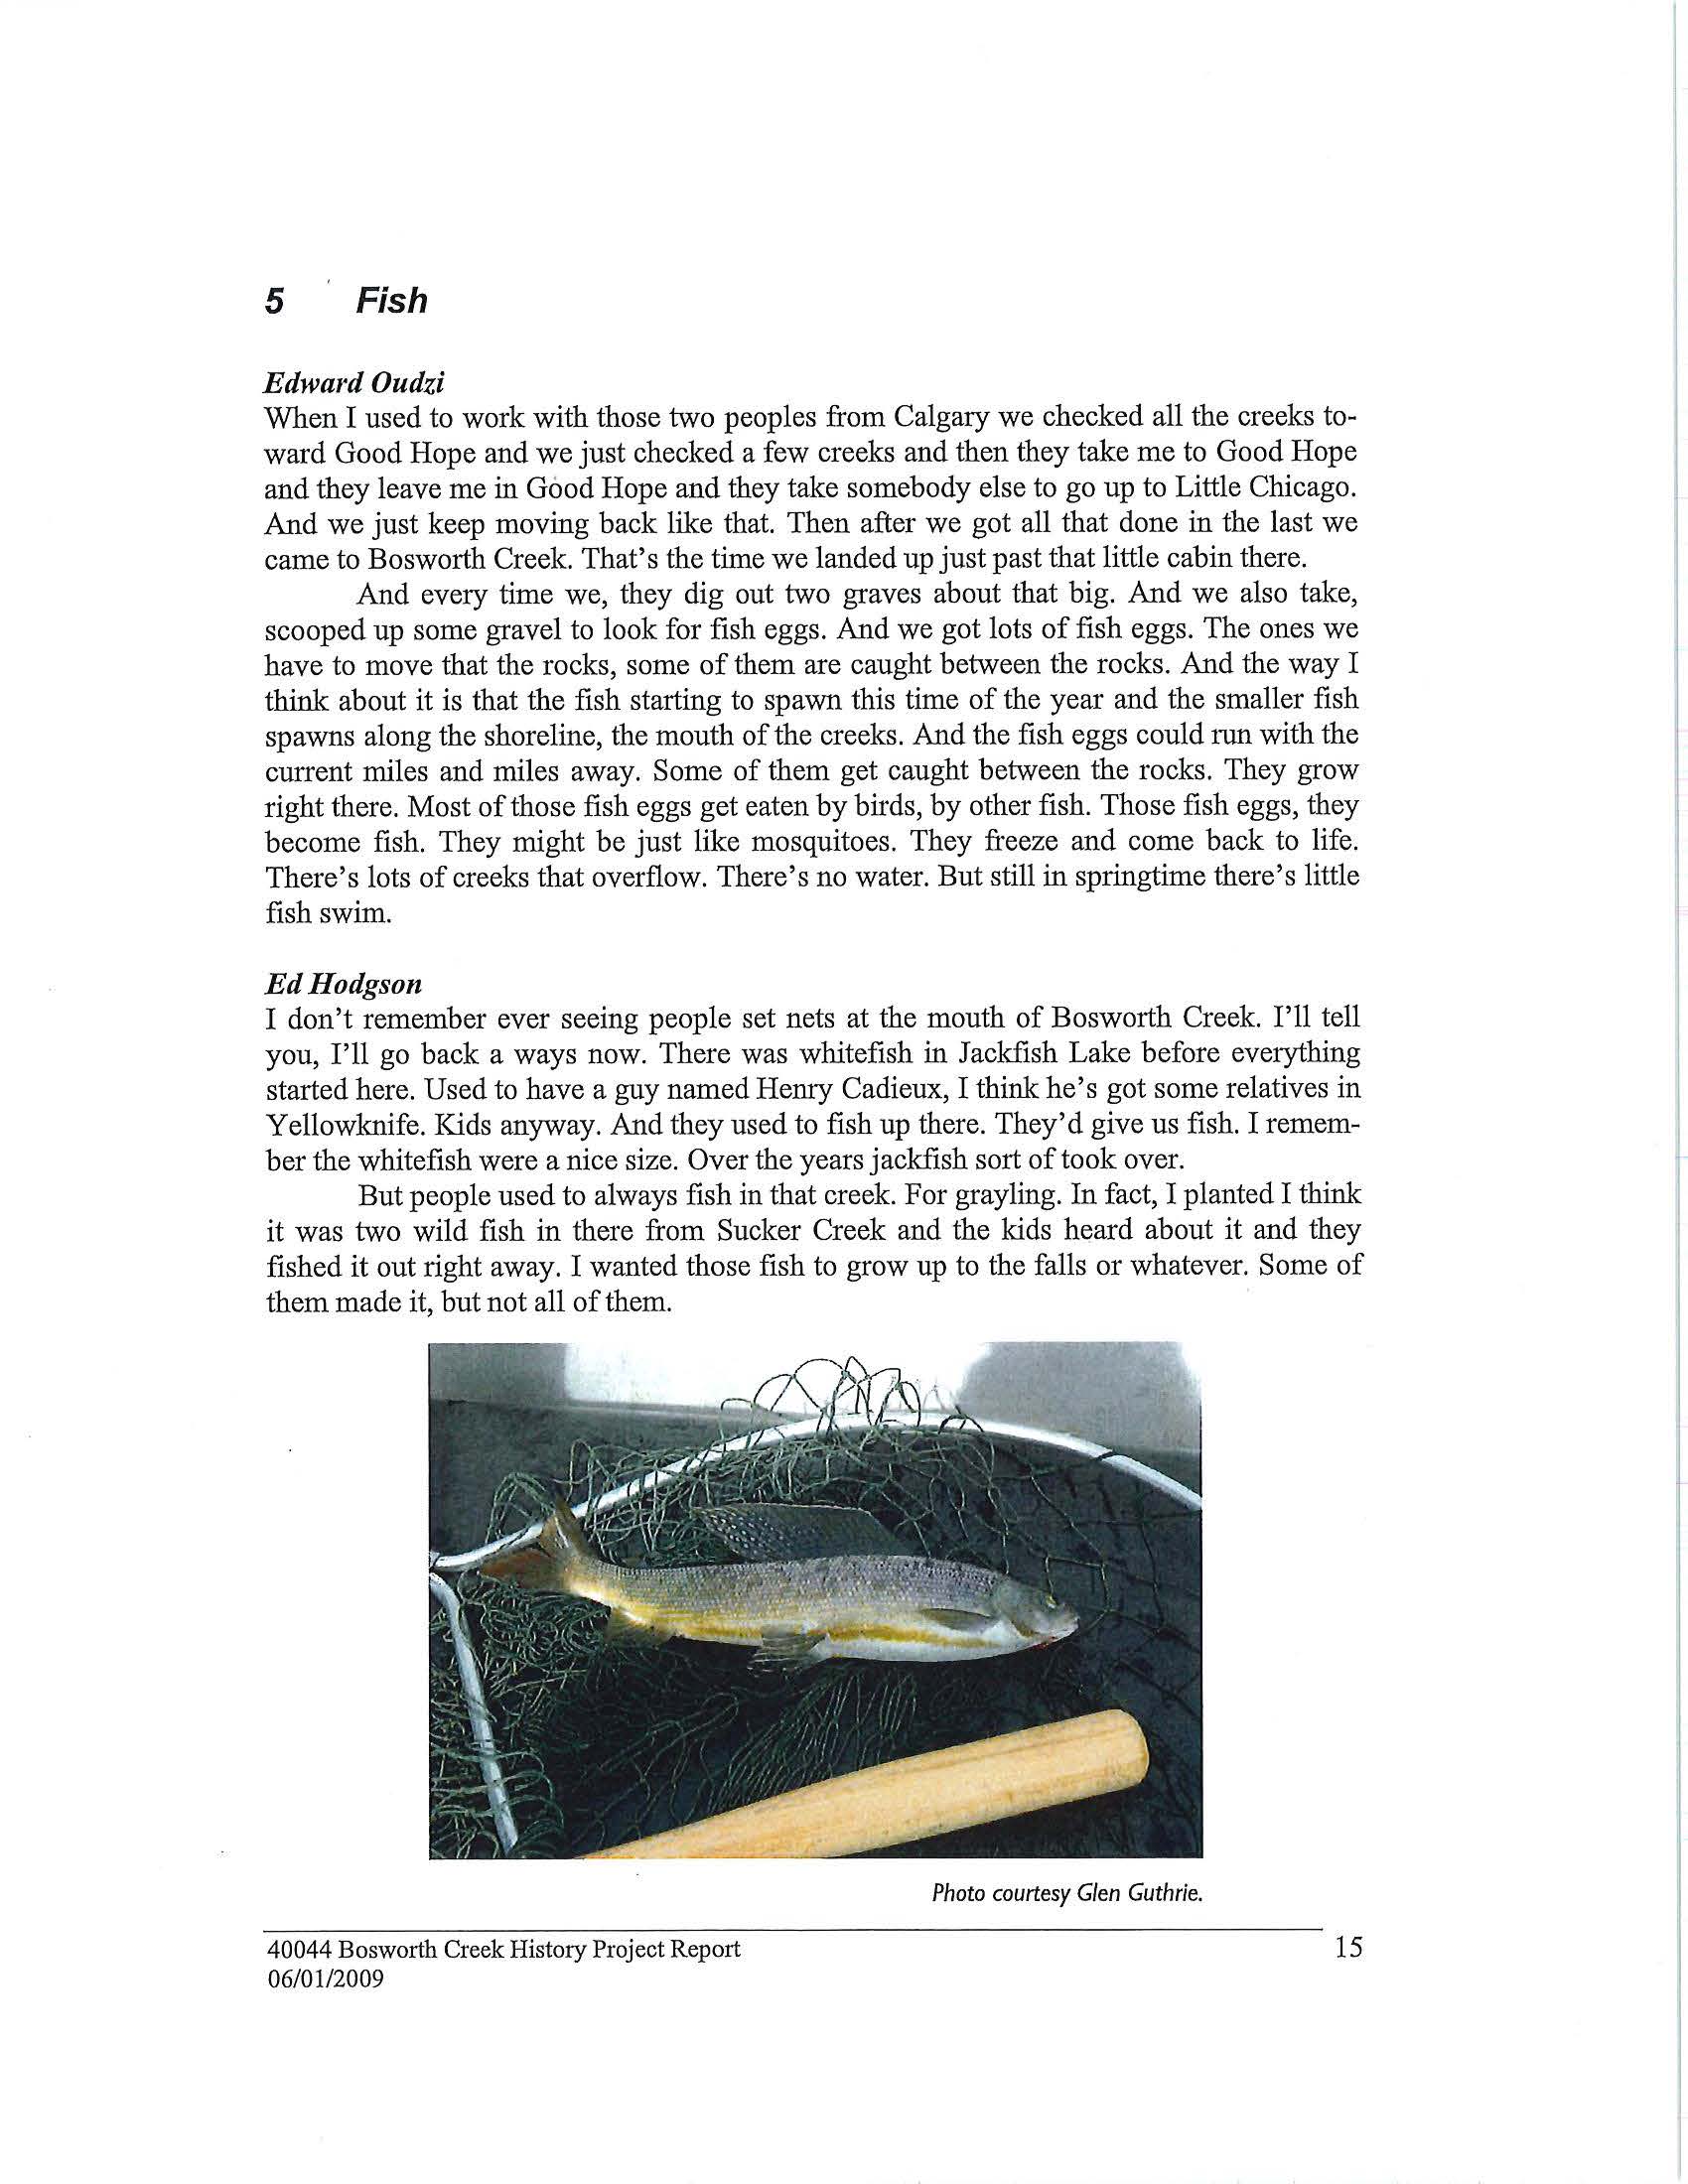 Bosworth Creek History Project Page 20